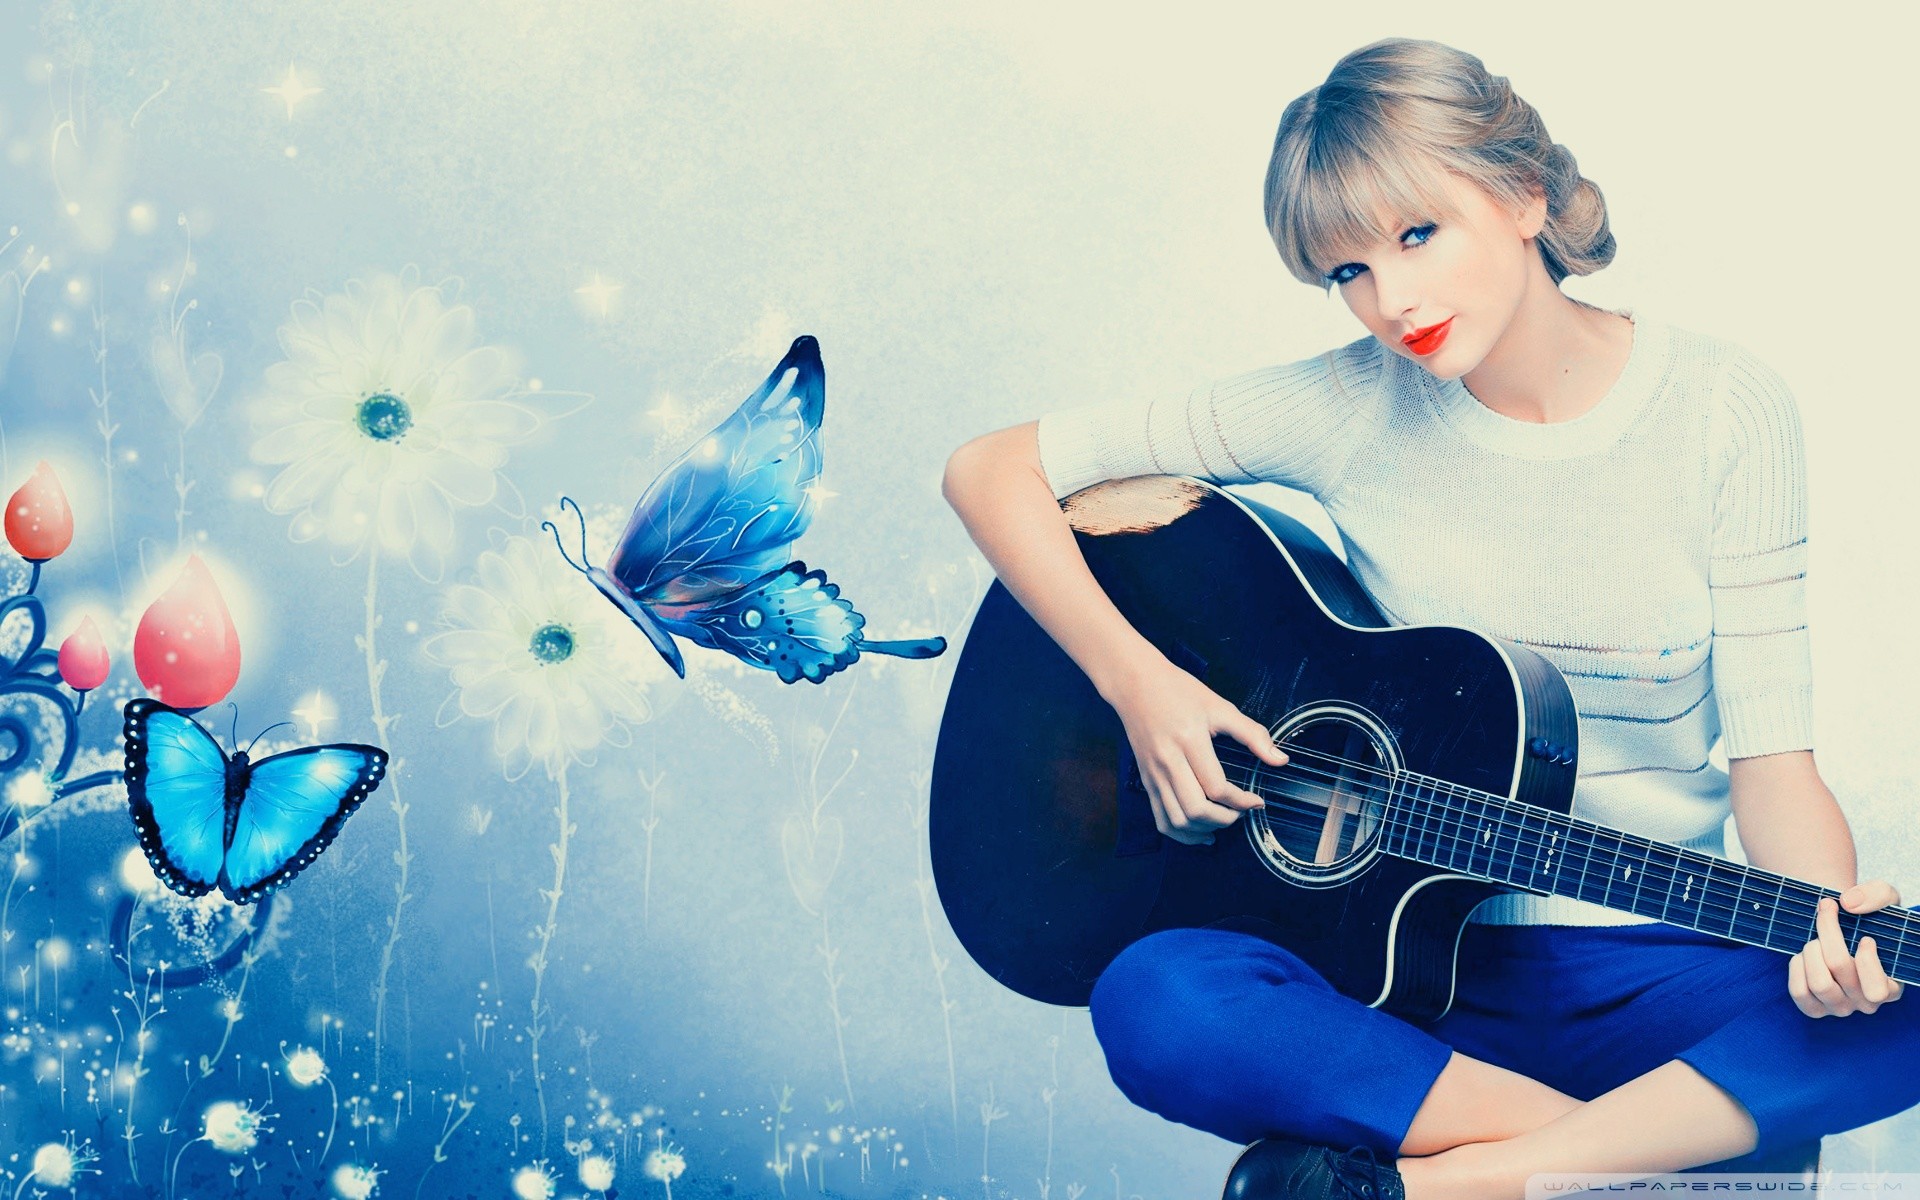 1920x1200 ... Download Famous American Singer Taylor Swift Wallpapers ...